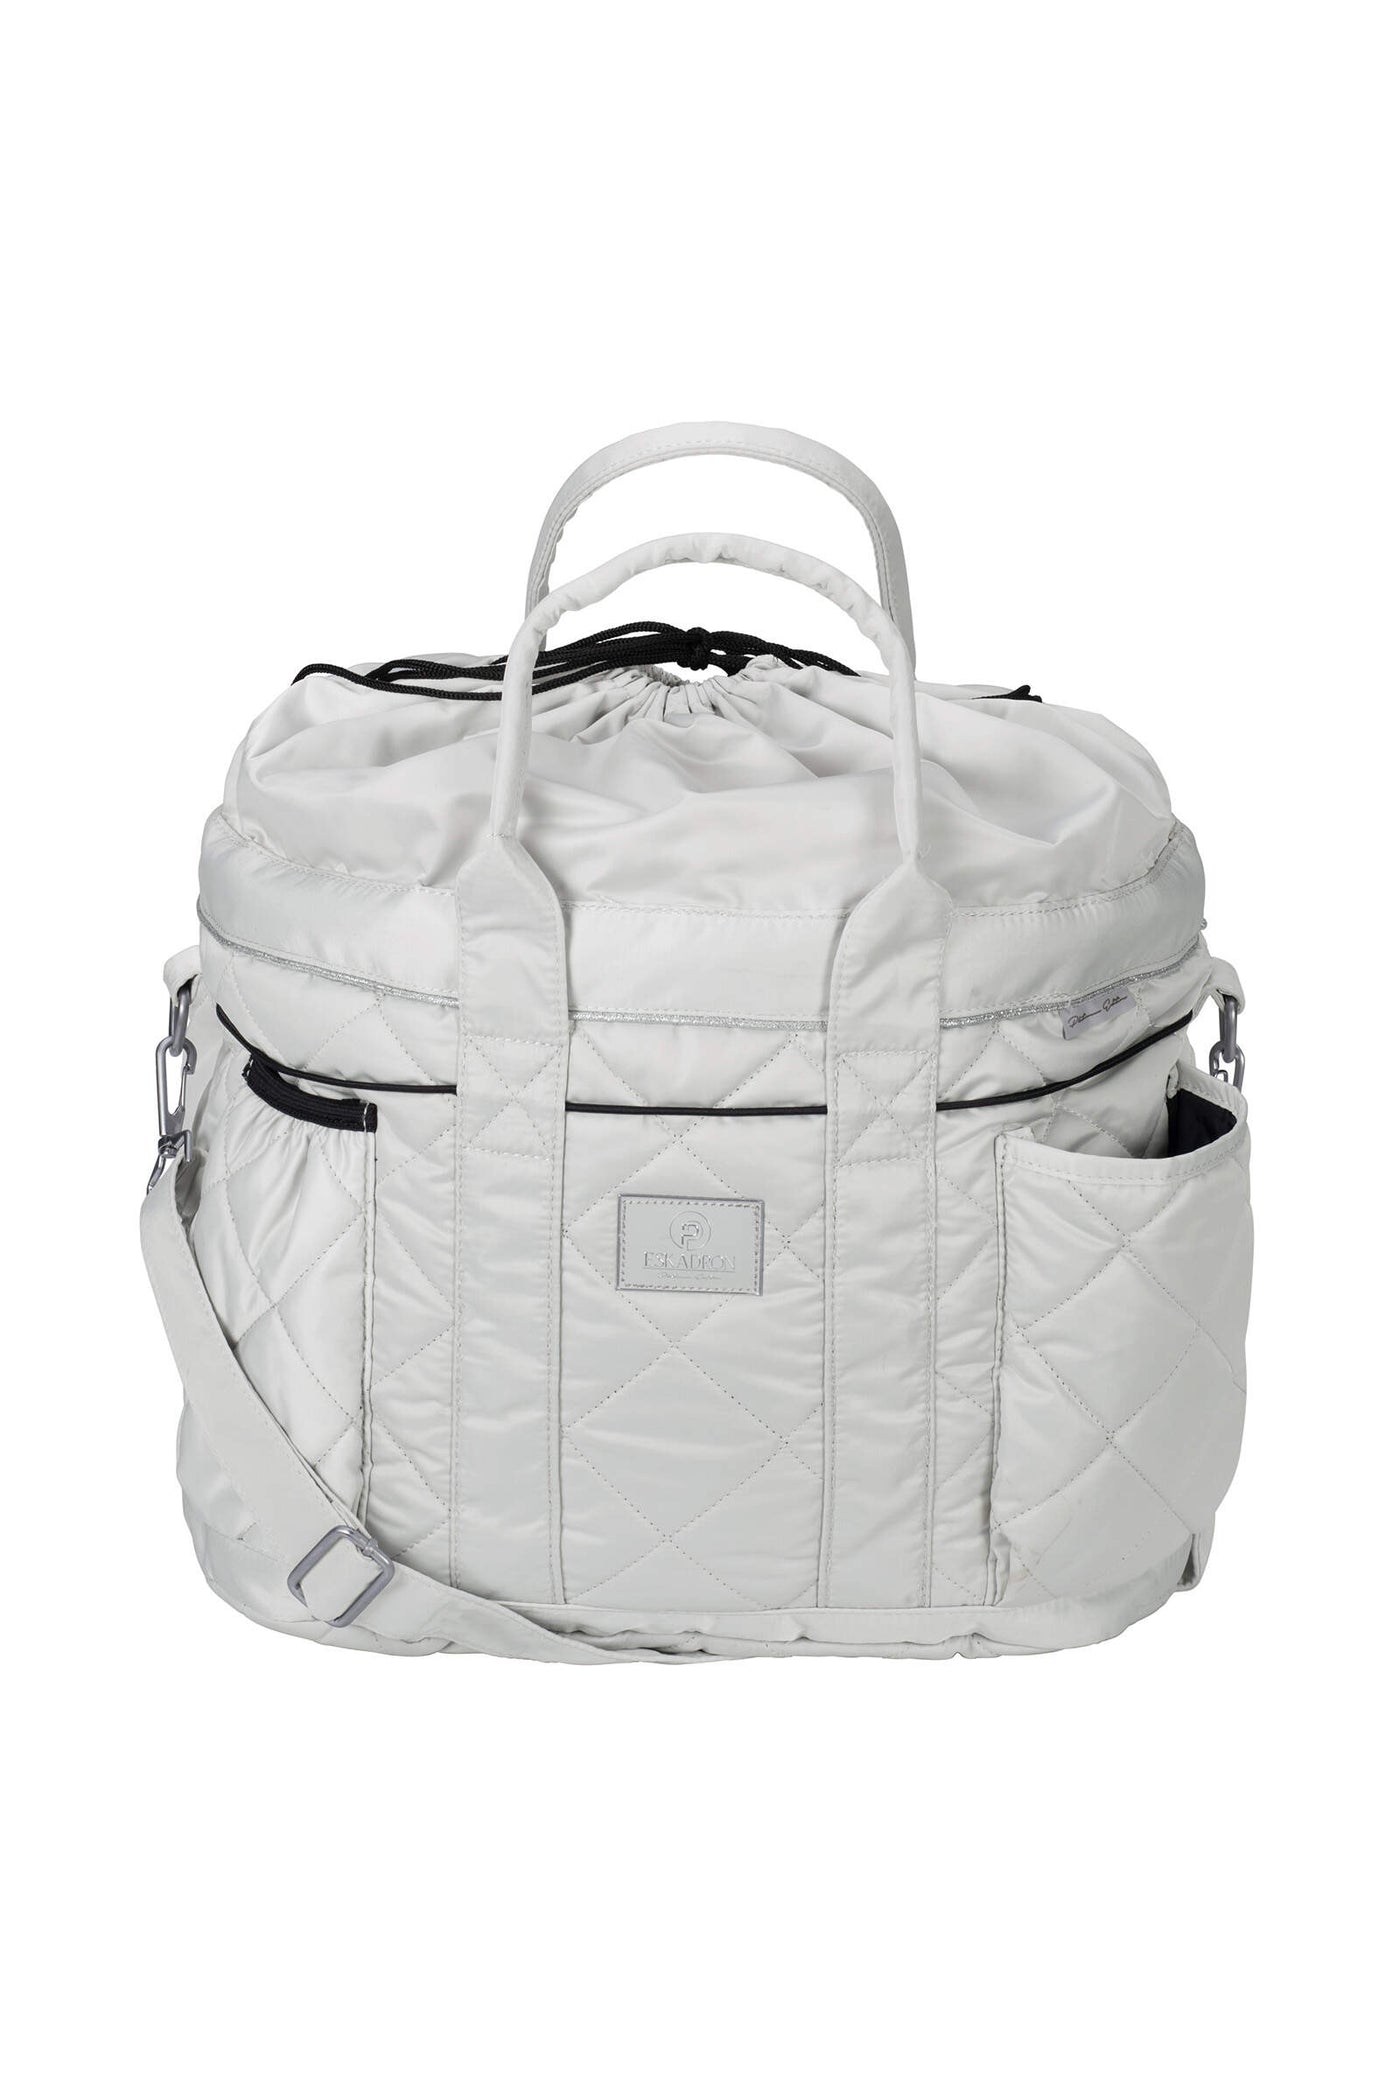 Eskadron Glossy Quilted Accessories Smoked Pearl Taske